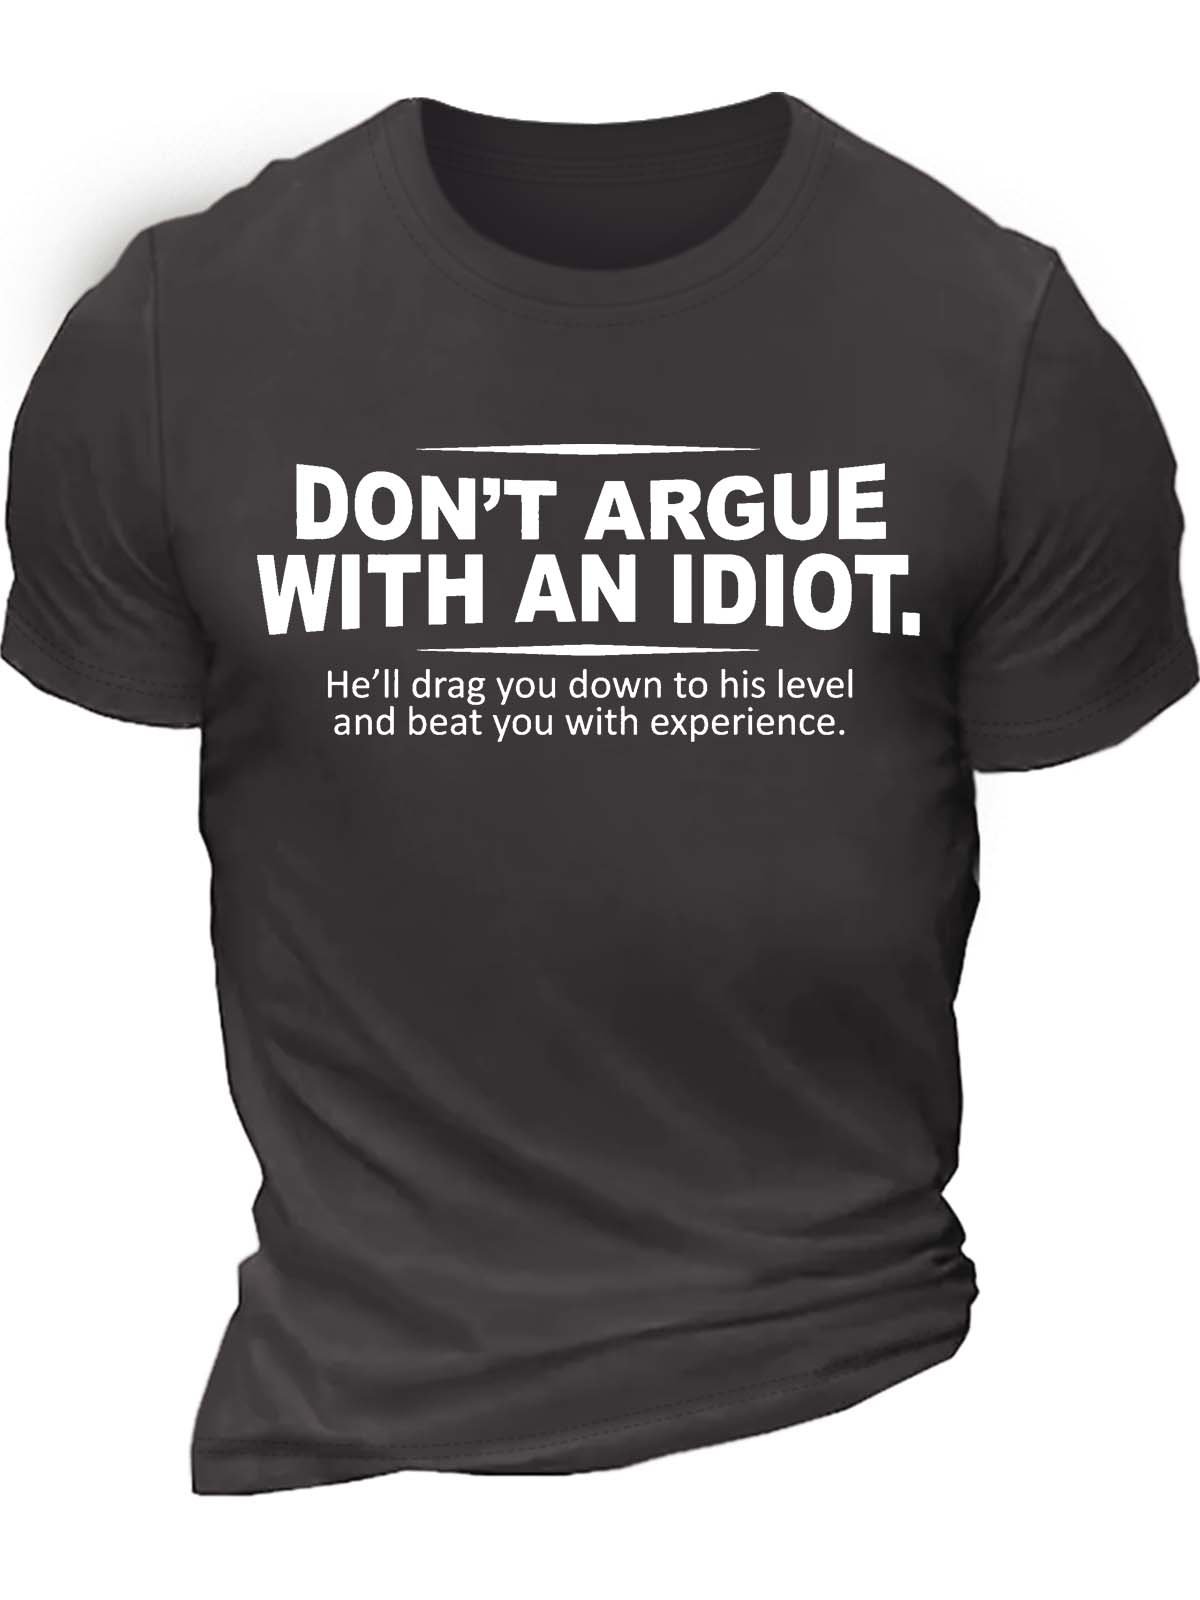 Men’s Don’t Argue With An Idiot He’ll Drag You Down To His Level And Beat You With Experience Cotton Crew Neck Casual T-Shirt